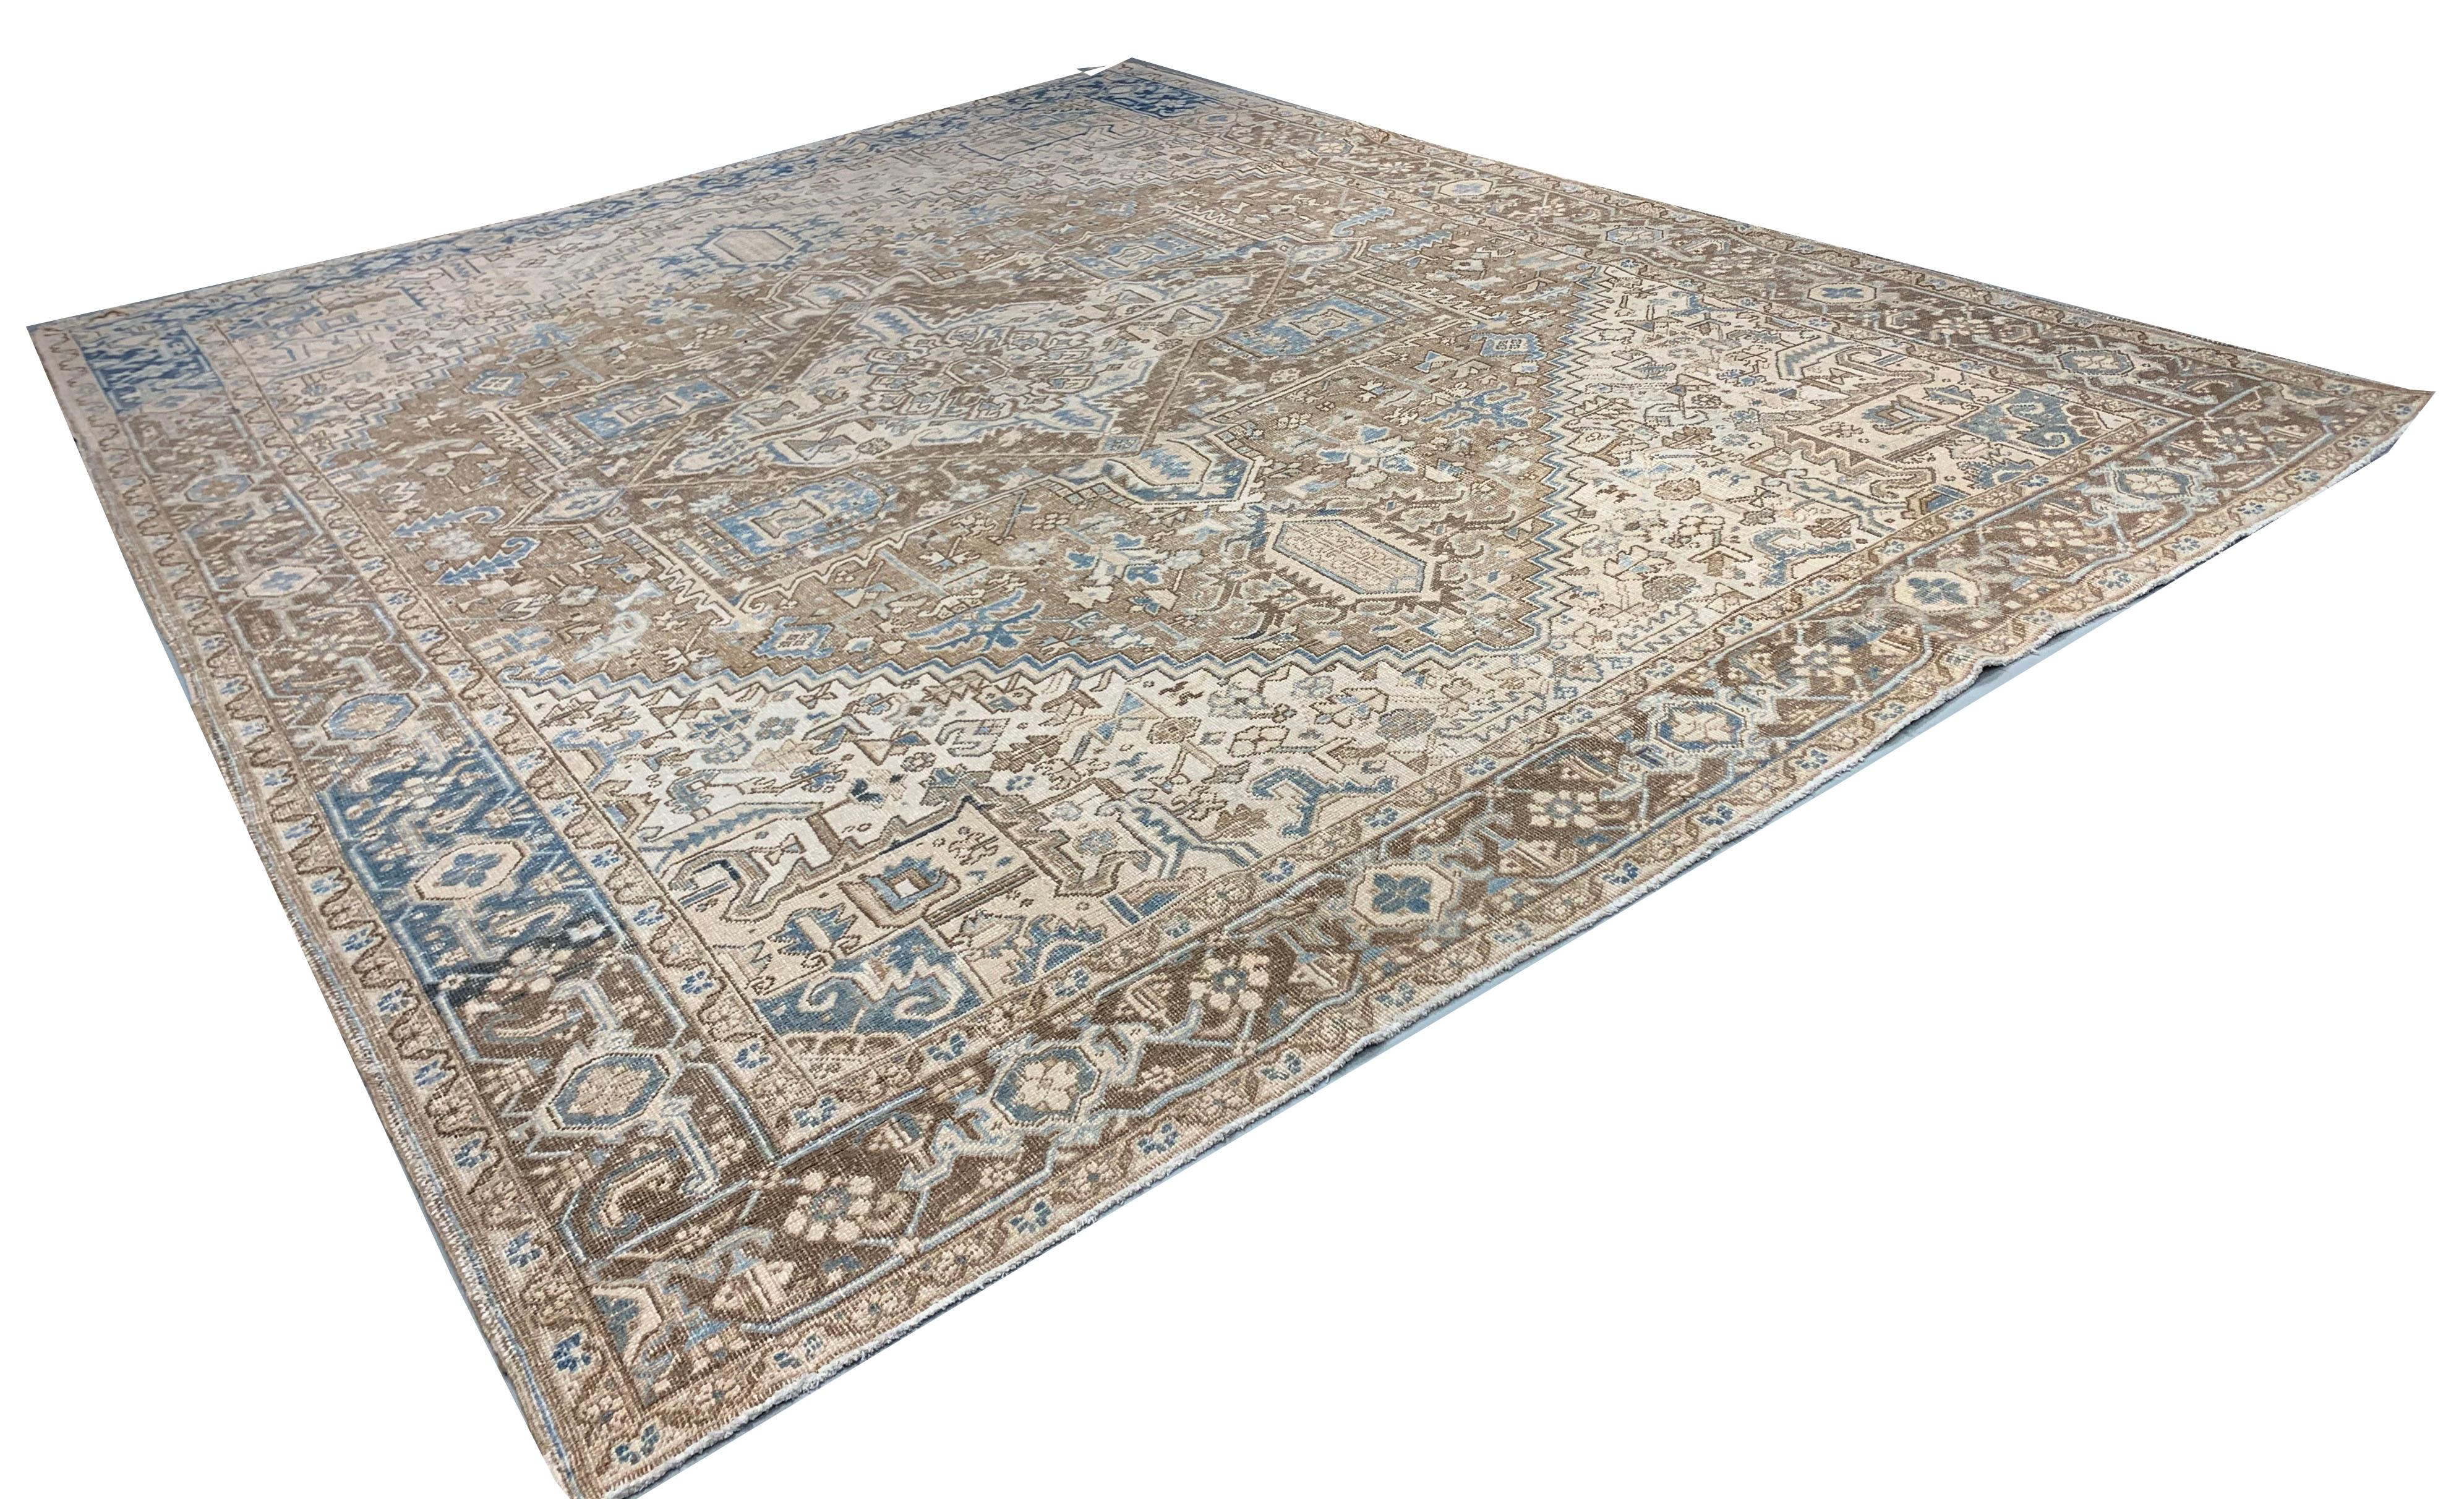 20th Century Vintage Persian Lightly Distressed Heriz Rug  9'10 x 12'6 For Sale